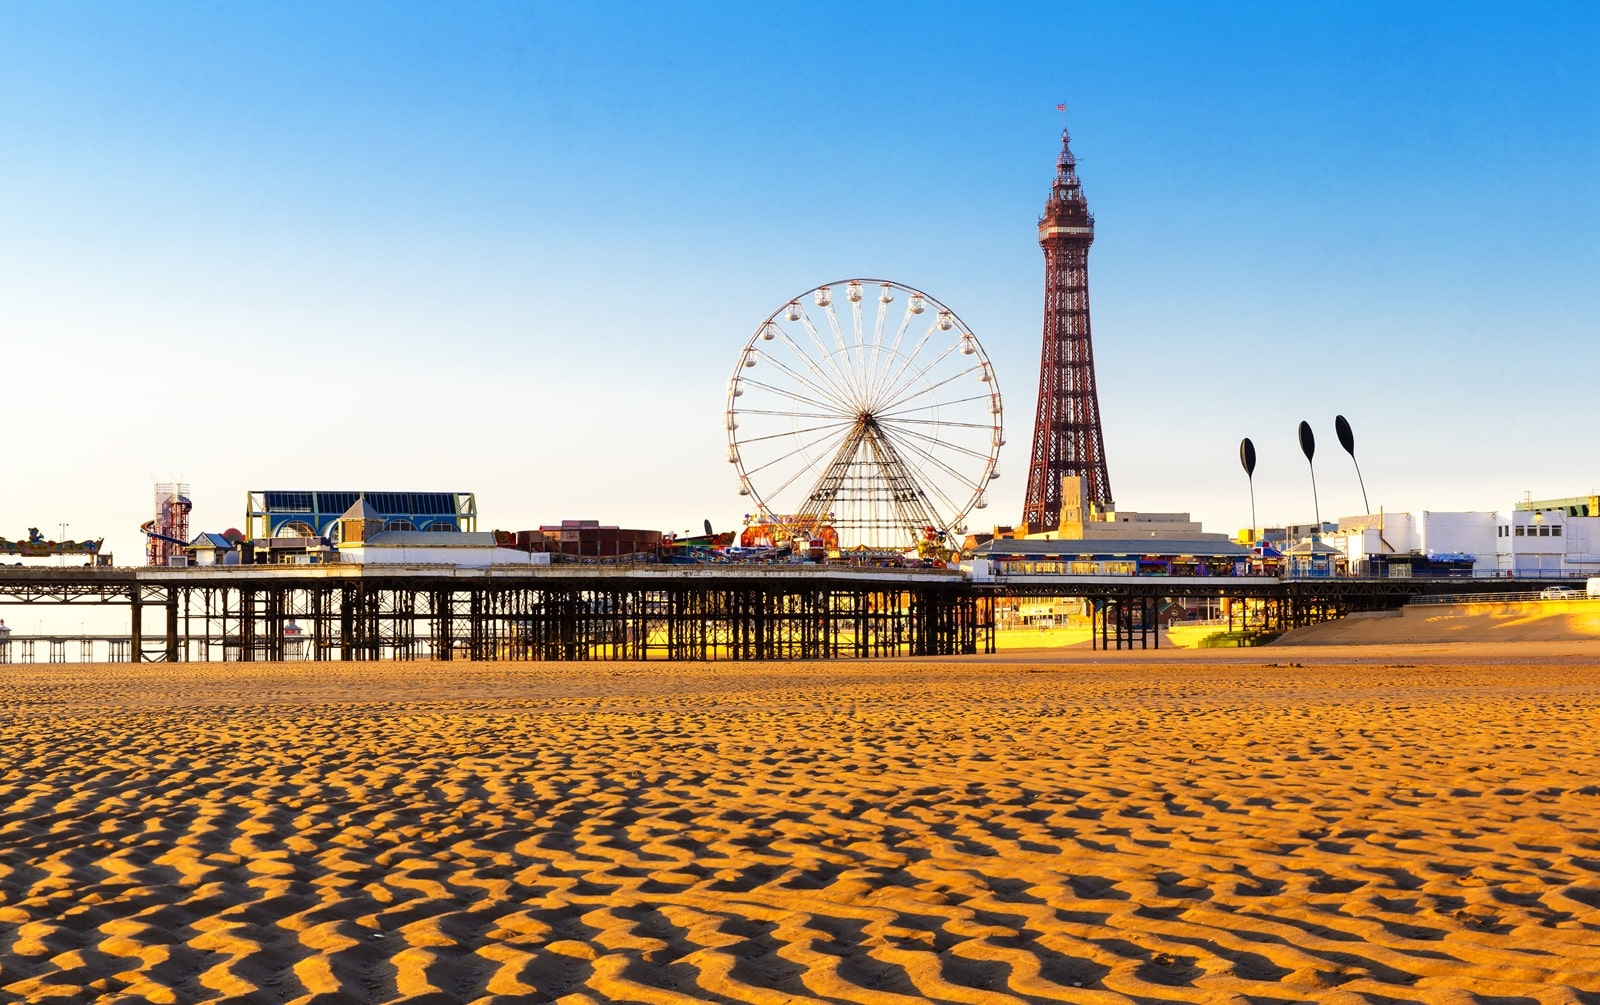 Image Credit: Shutterstock / Paul Daniels <p>Known for its economic decline and social challenges, Blackpool often ranks poorly in quality-of-life assessments.</p>